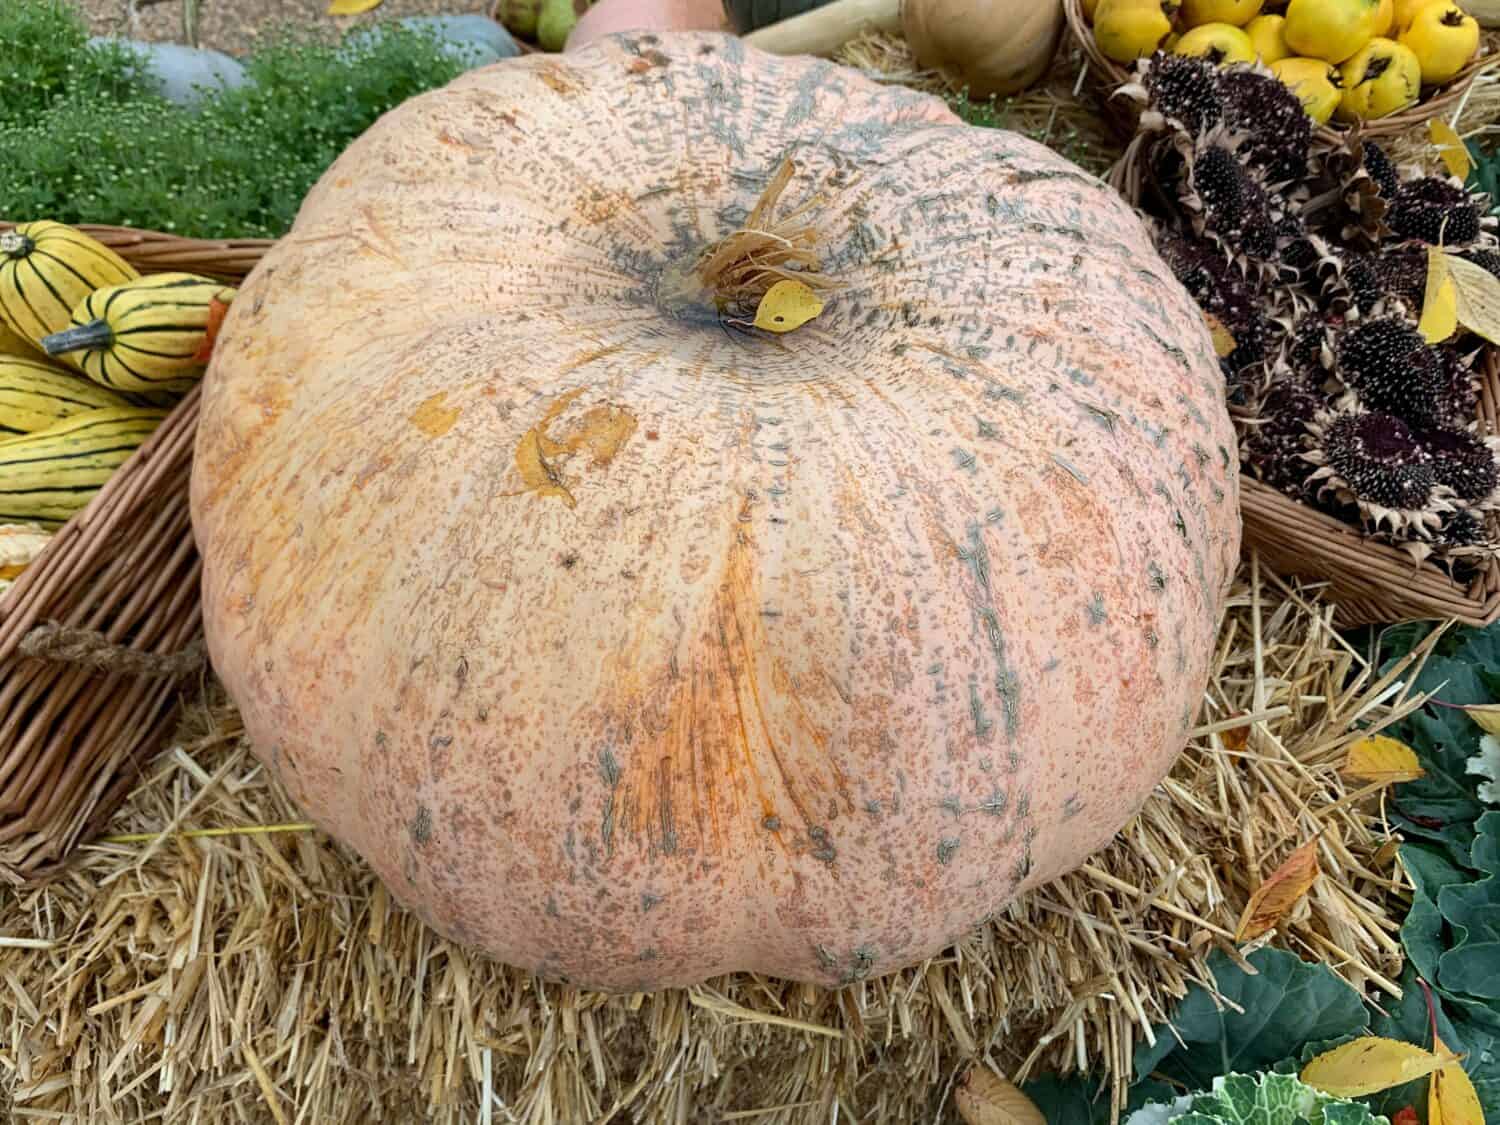 Close up of a display of a large pumpkin or winter squash seen outdoors in autumn.